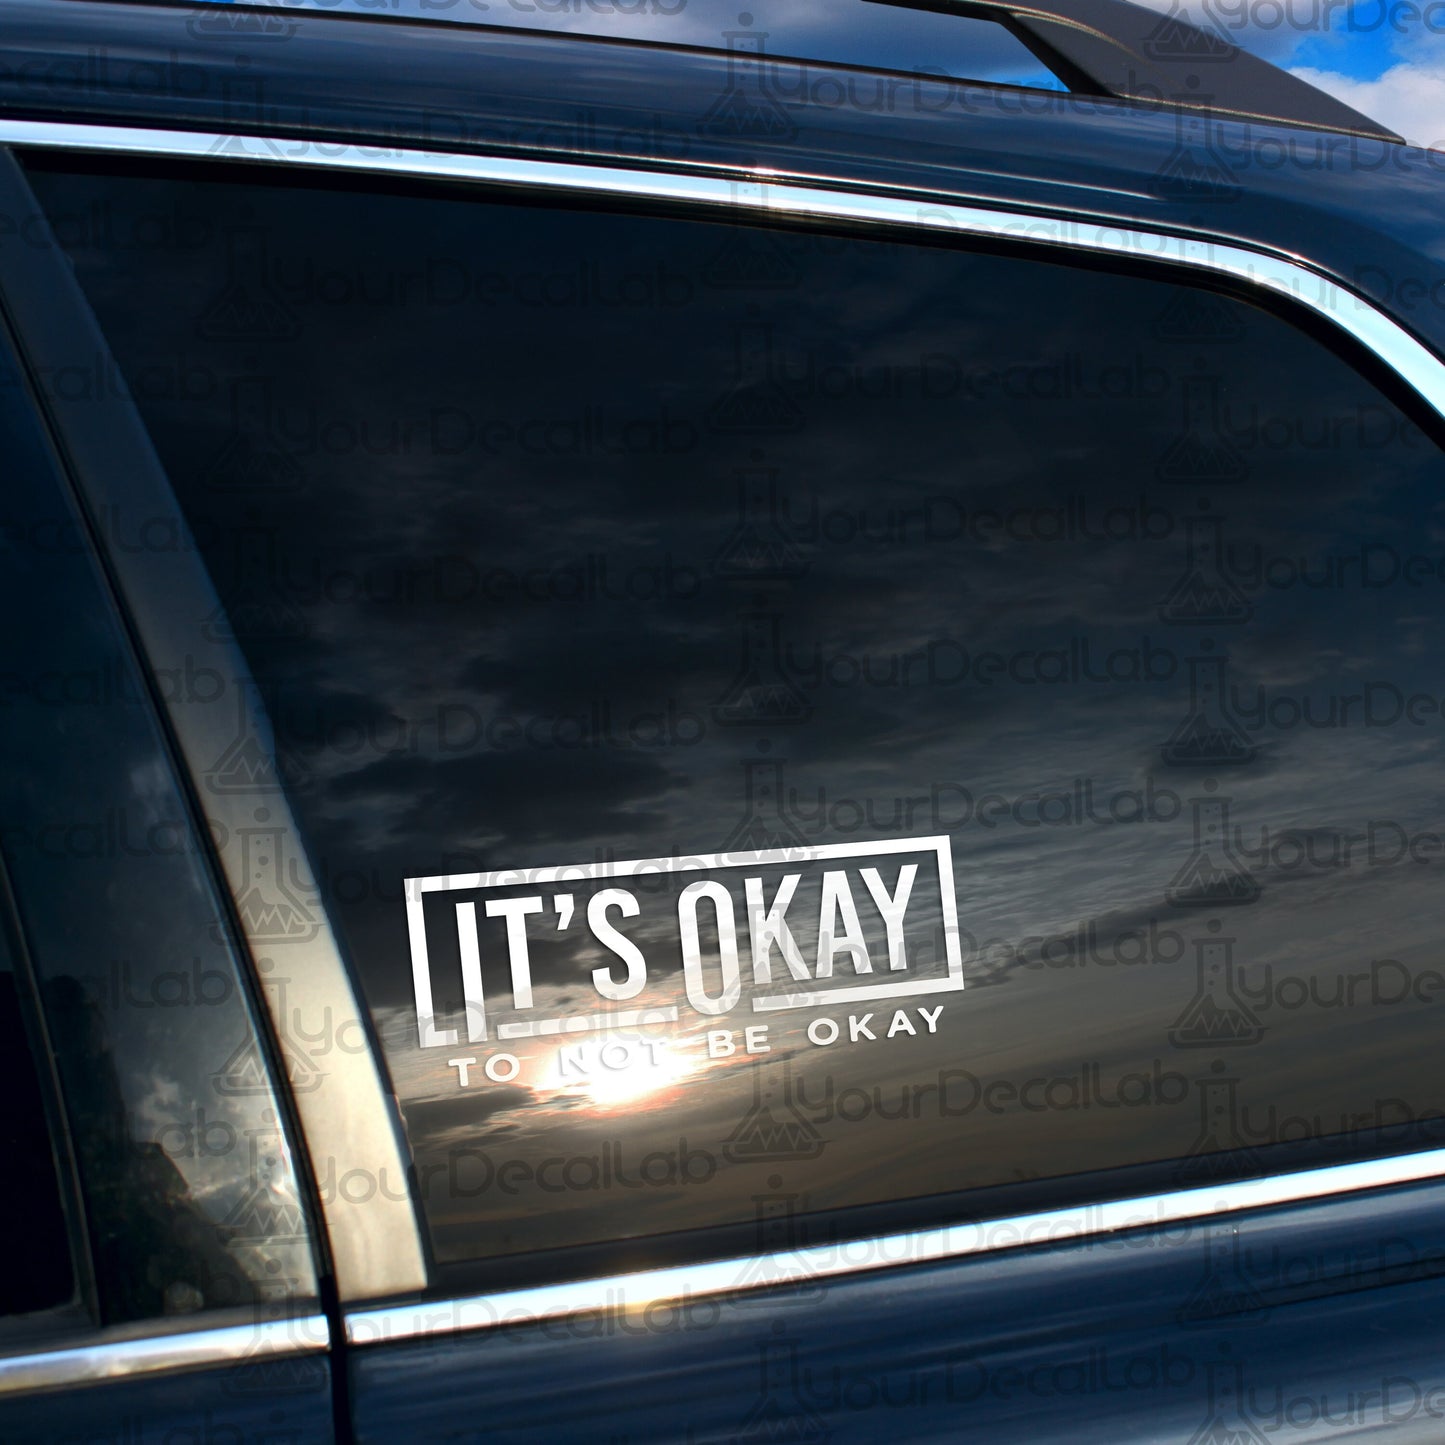 it&#39;s okay to see okay sticker on a car